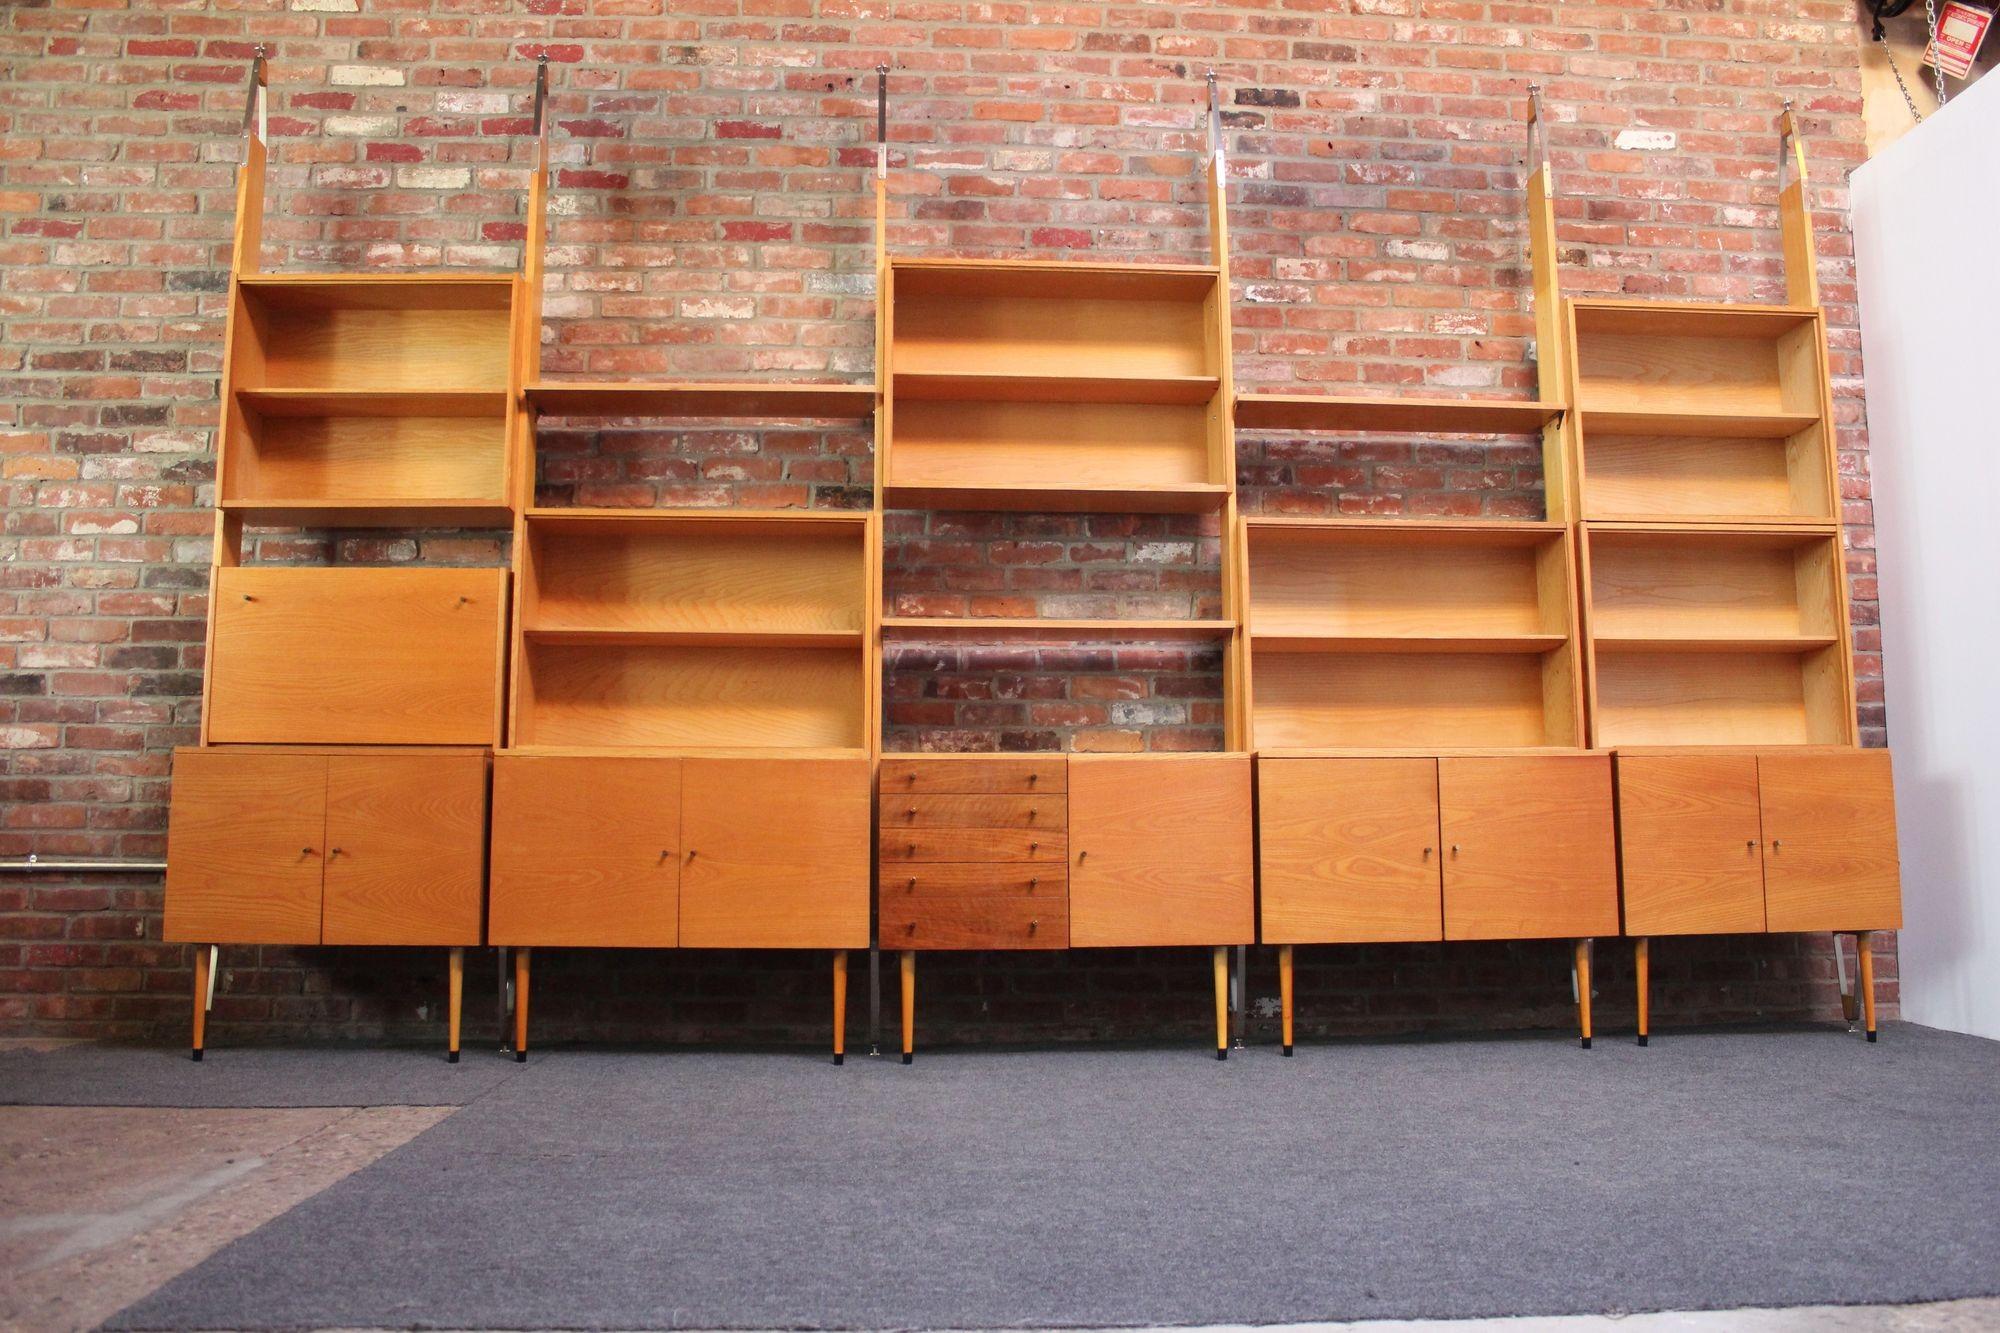 Versatile freestanding wall-unit/bookcase in oak, walnut, and pine with aluminum, steel, and brass accents by Jitona (1968, Lomnice nad Lužnicí, Czechoslovakia). 
Five bays can be assembled in total if all pieces are utilized together - seven pine